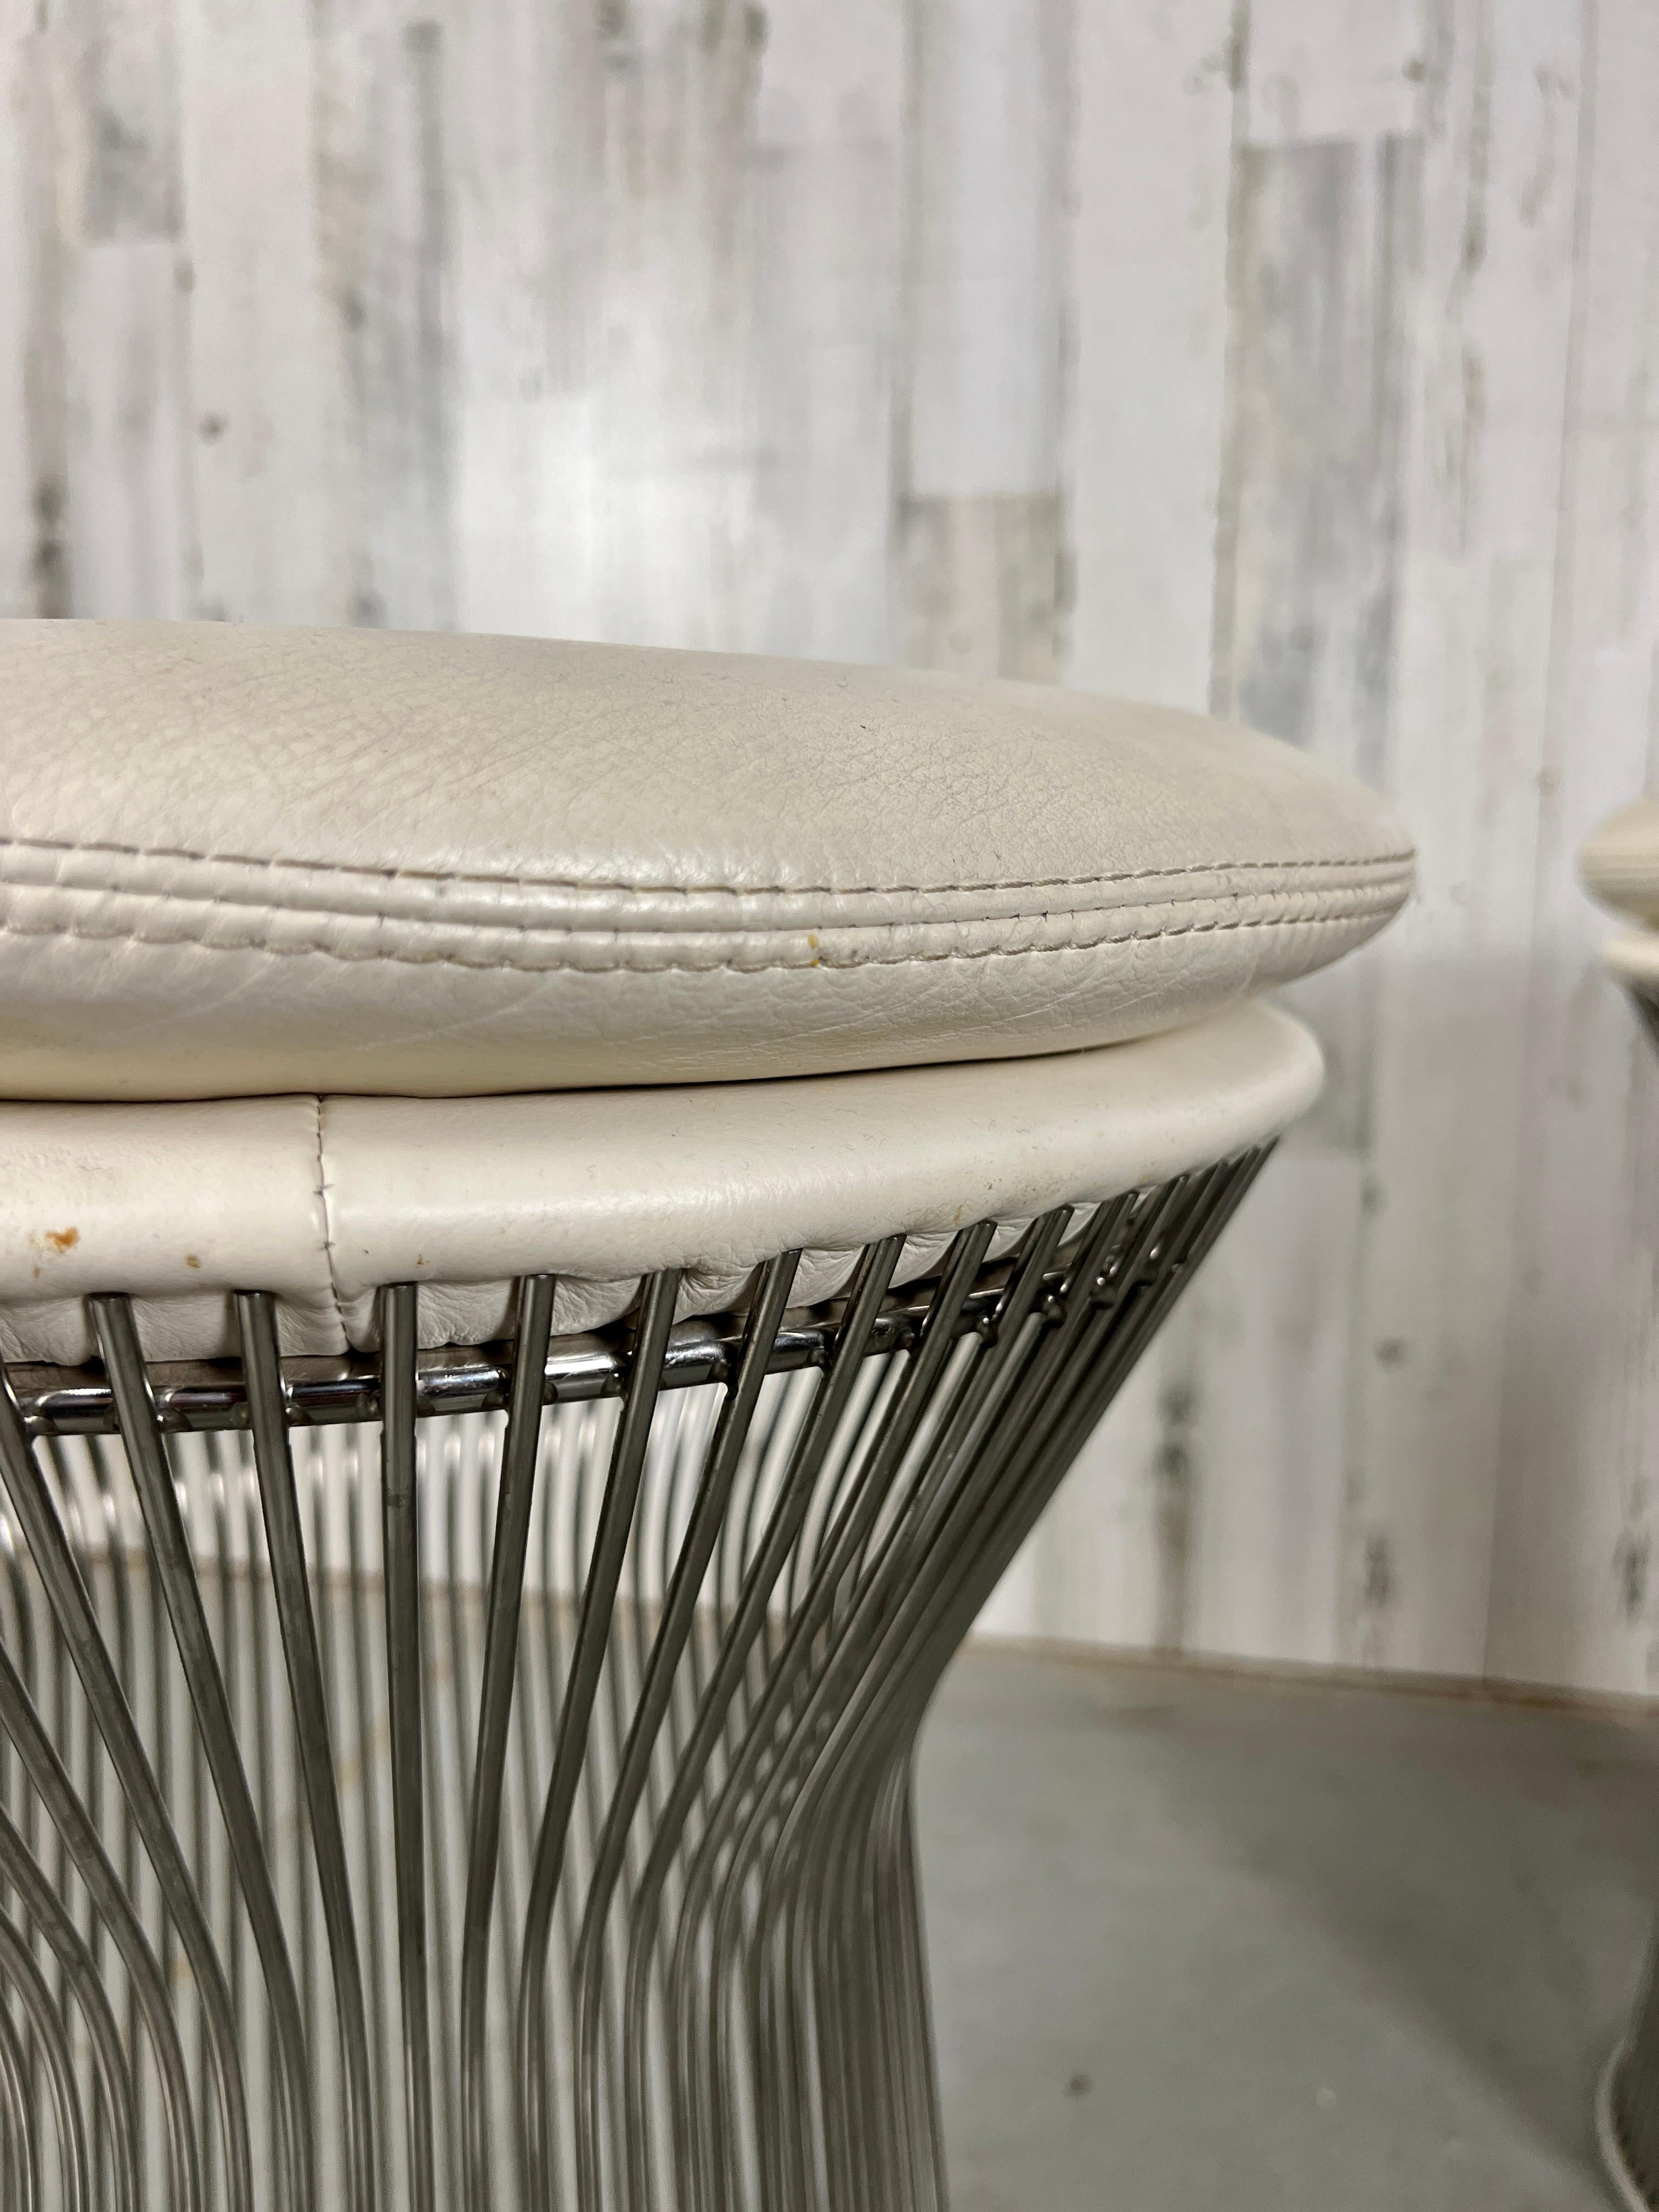 Chrome and Leather Platner style Stools For Sale 1